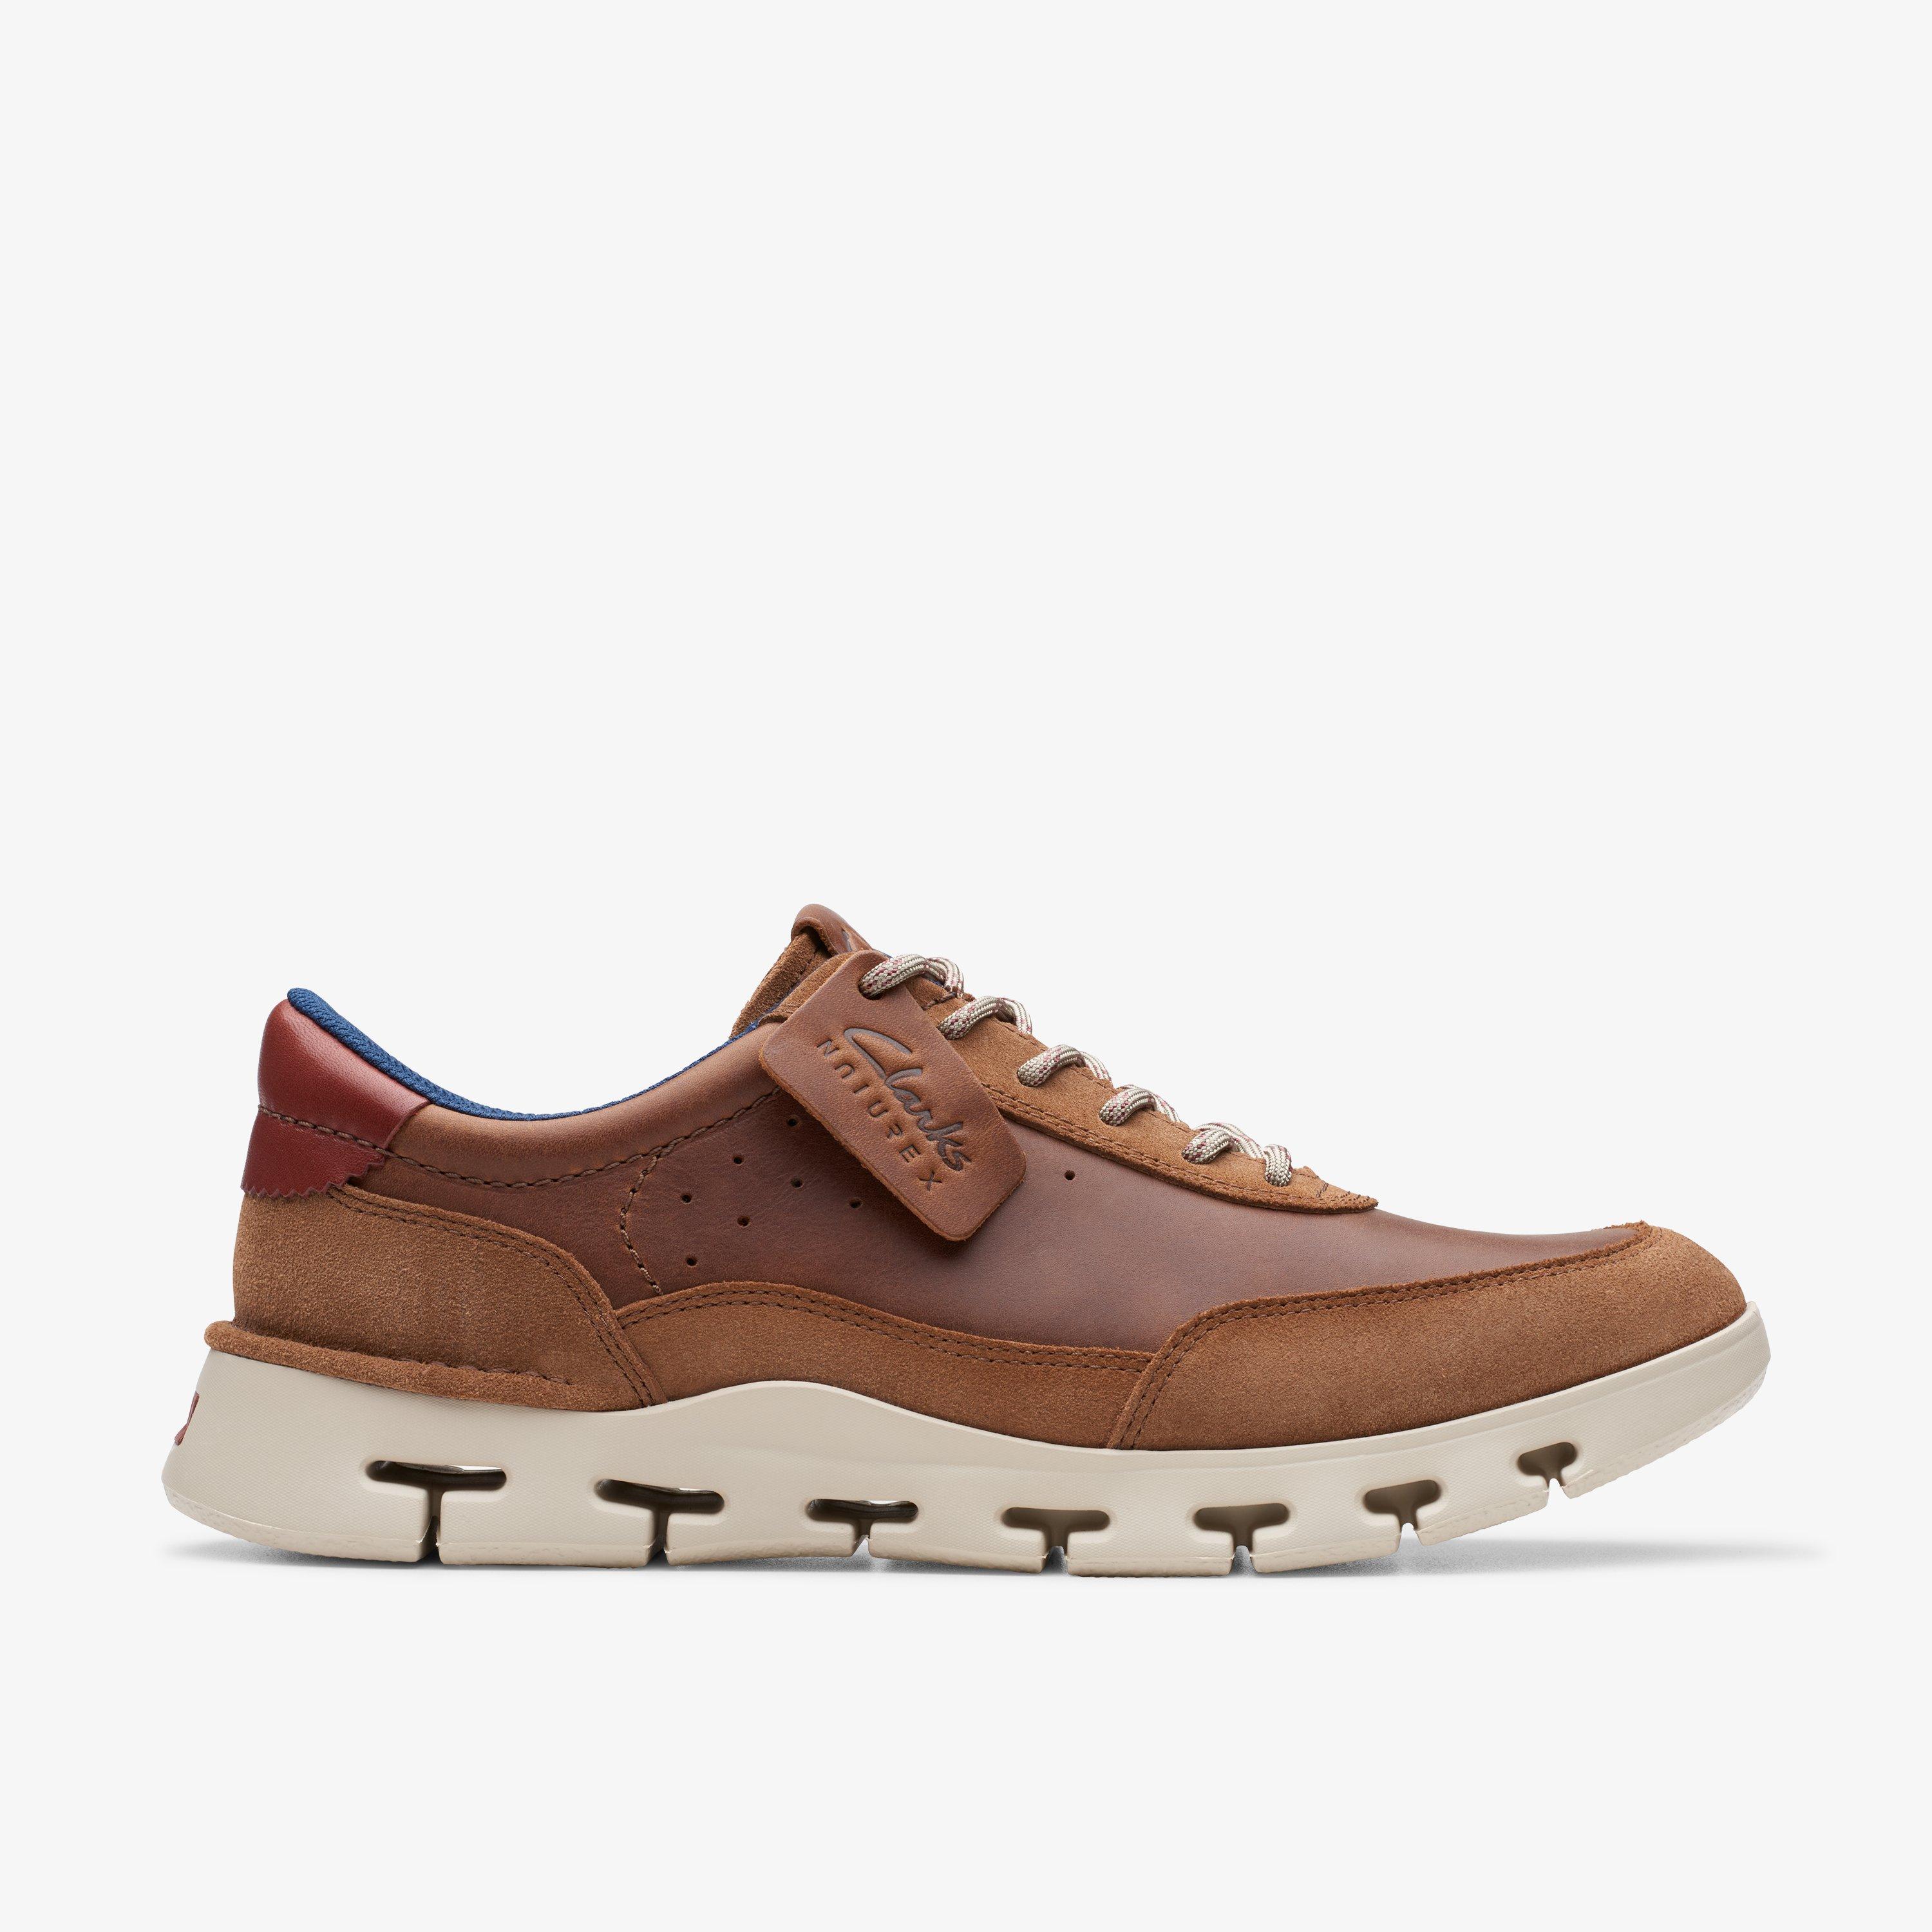 MENS Nature X One Dark Tan Leather Sneakers | Clarks US